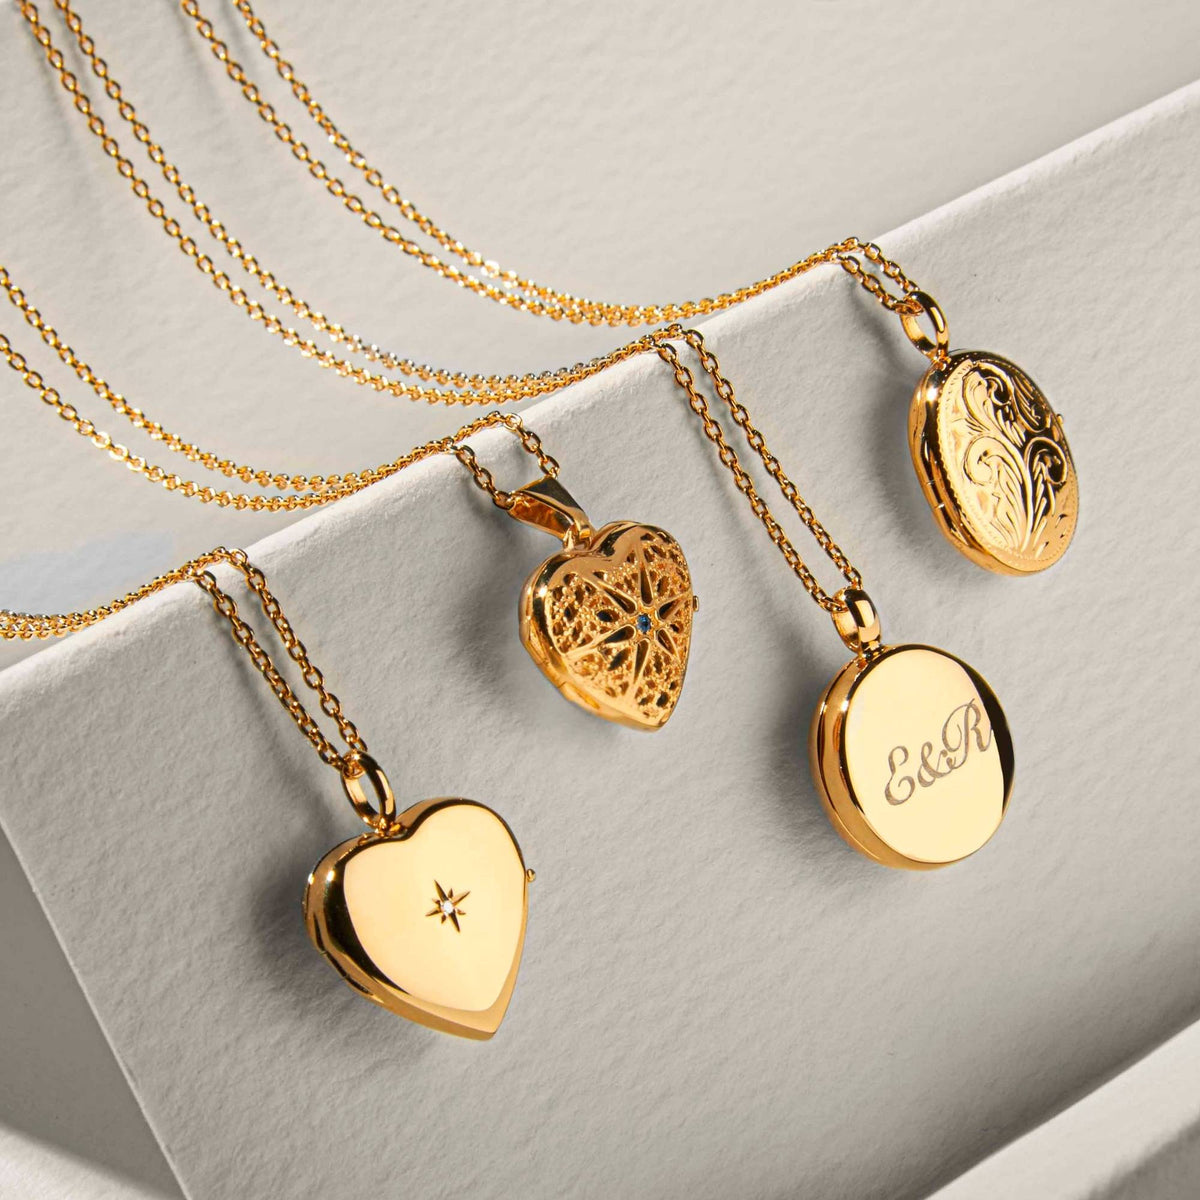 Gold Locket Necklaces For Women Engraved With Photos